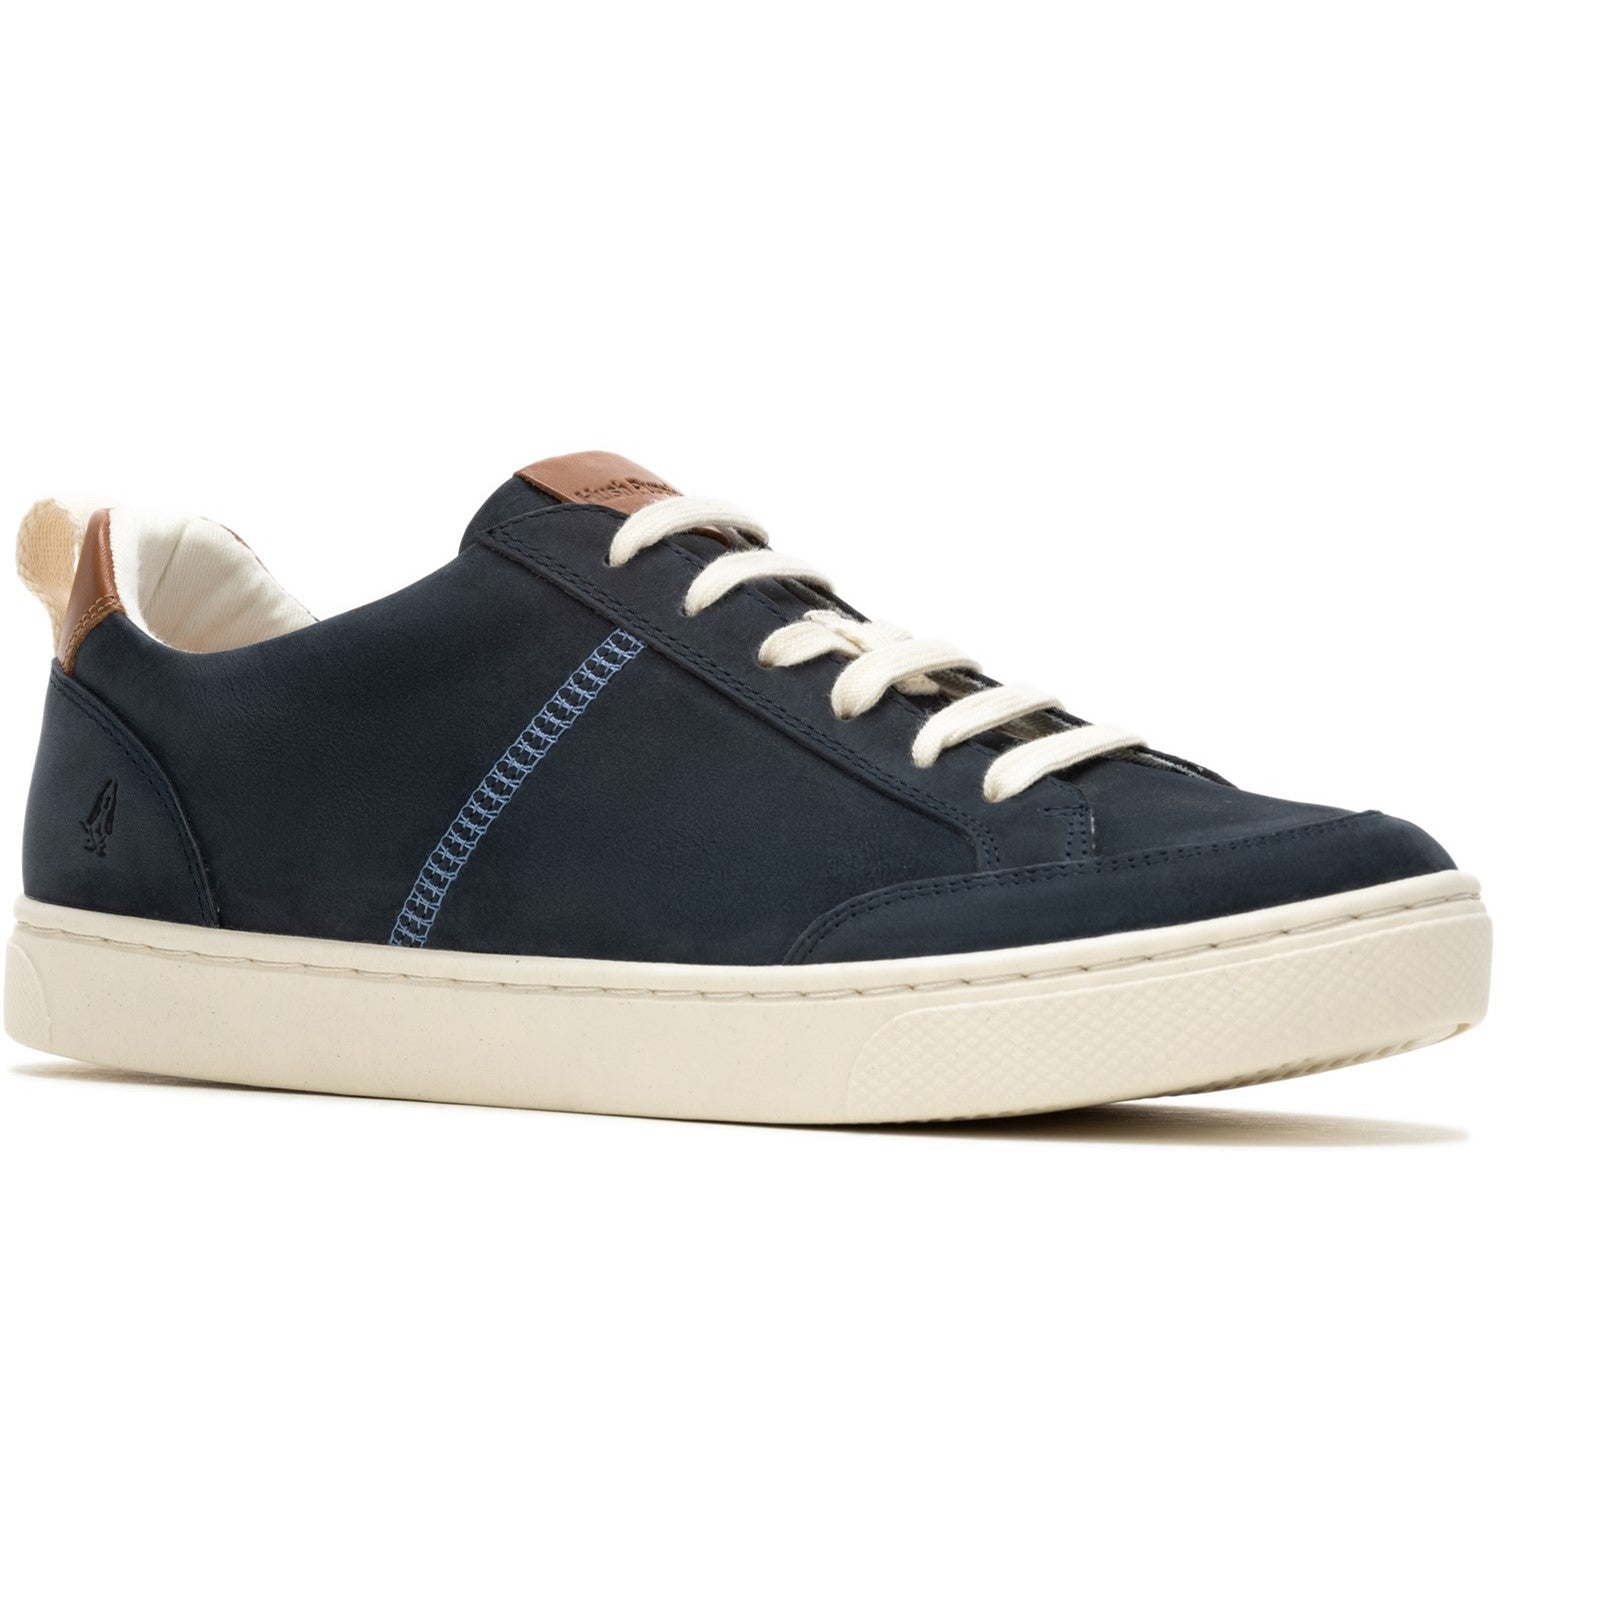 Mens Sports Navy Hush Puppies The Good Low Top Shoe